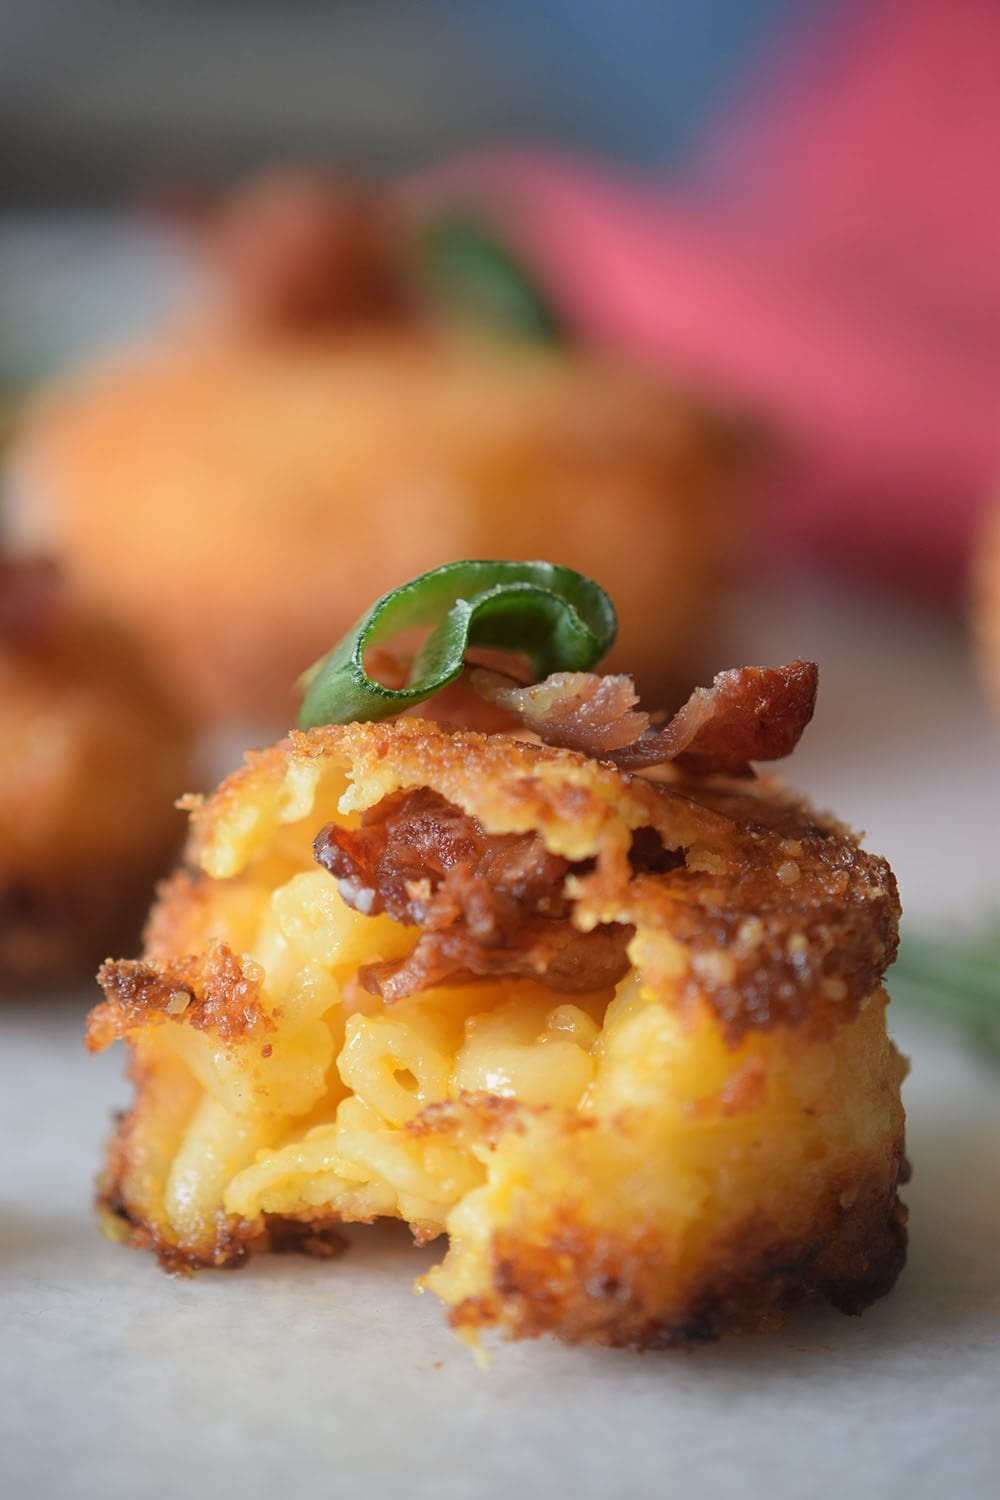 Bacon Mac and Cheese Bites Recipe